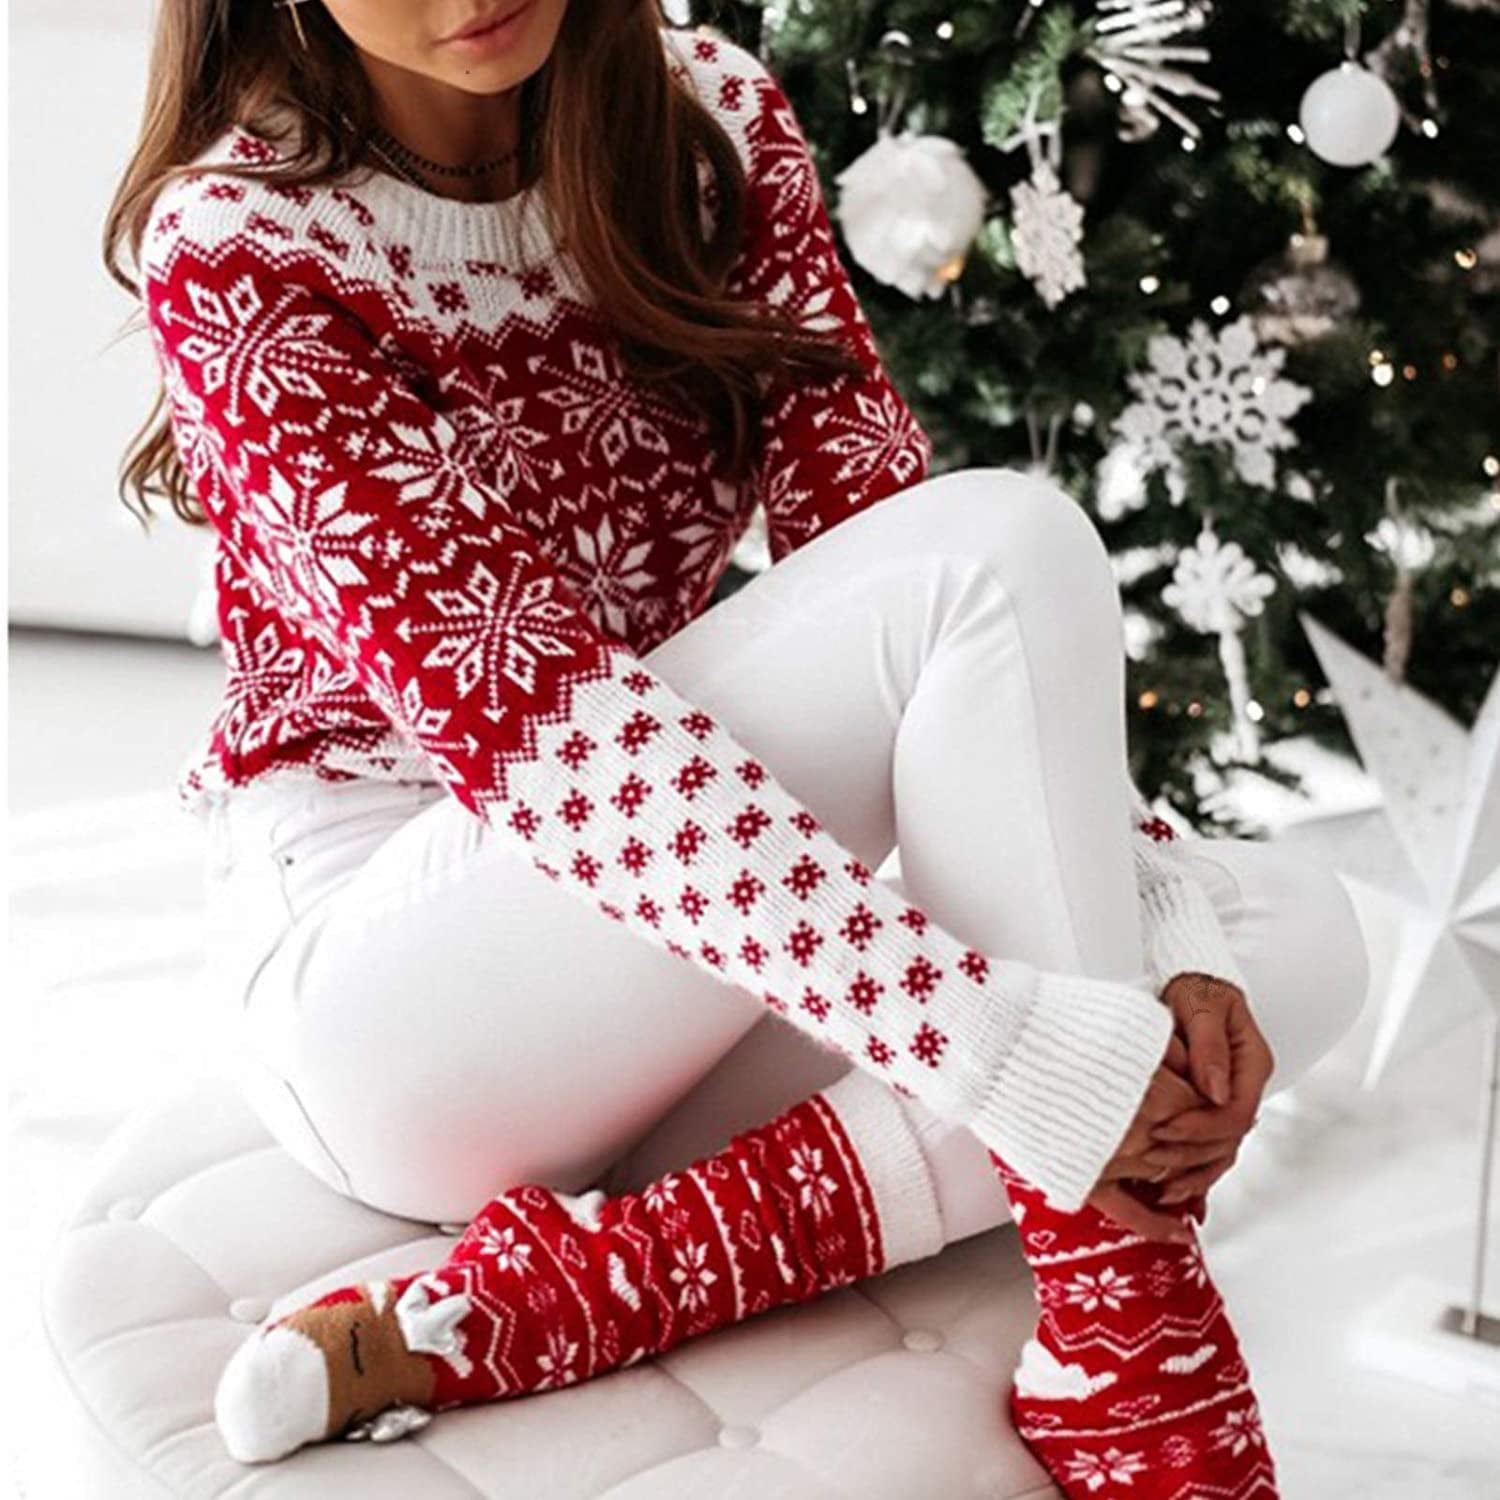 Vastitch - Don't just feel the spirit of Christmas - wear it. Experience  the Knitted Christmas Leggings. Get a pair now. 🛒 : vastitch.com/products/ knitted-christmas-leggings | Facebook